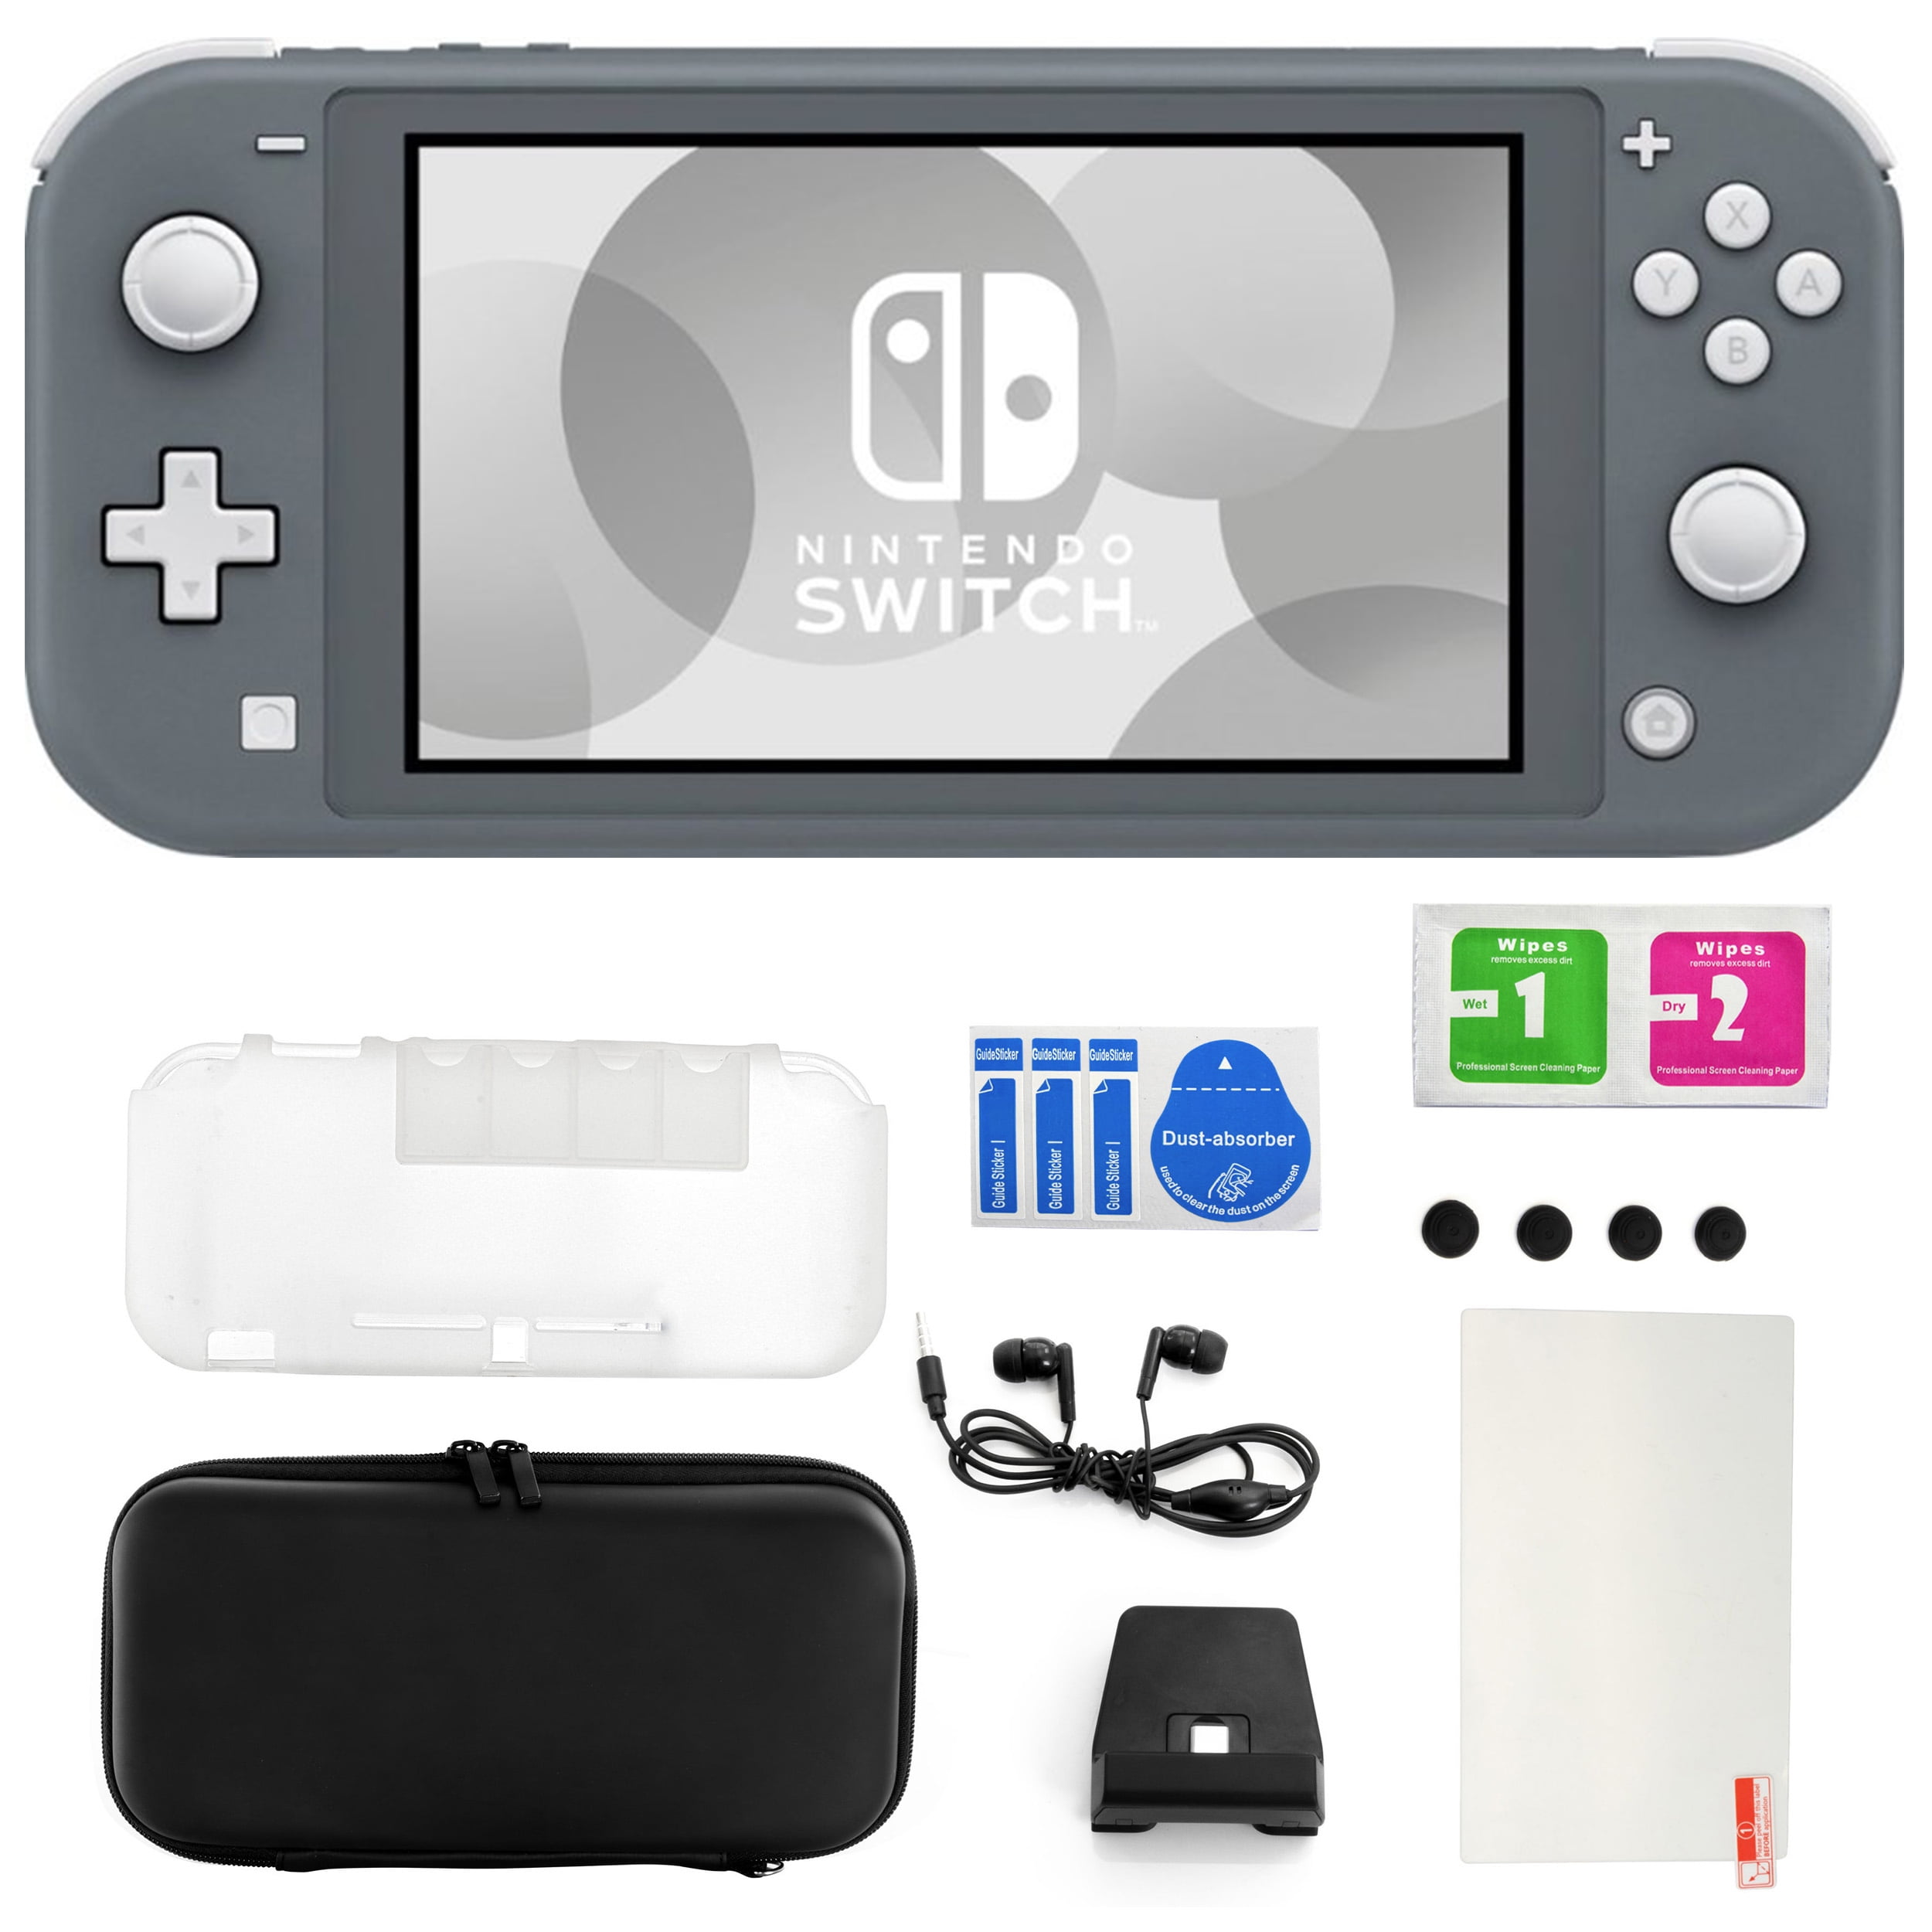 Nintendo Switch Lite in Gray with 11 in 1 Accessories Kit